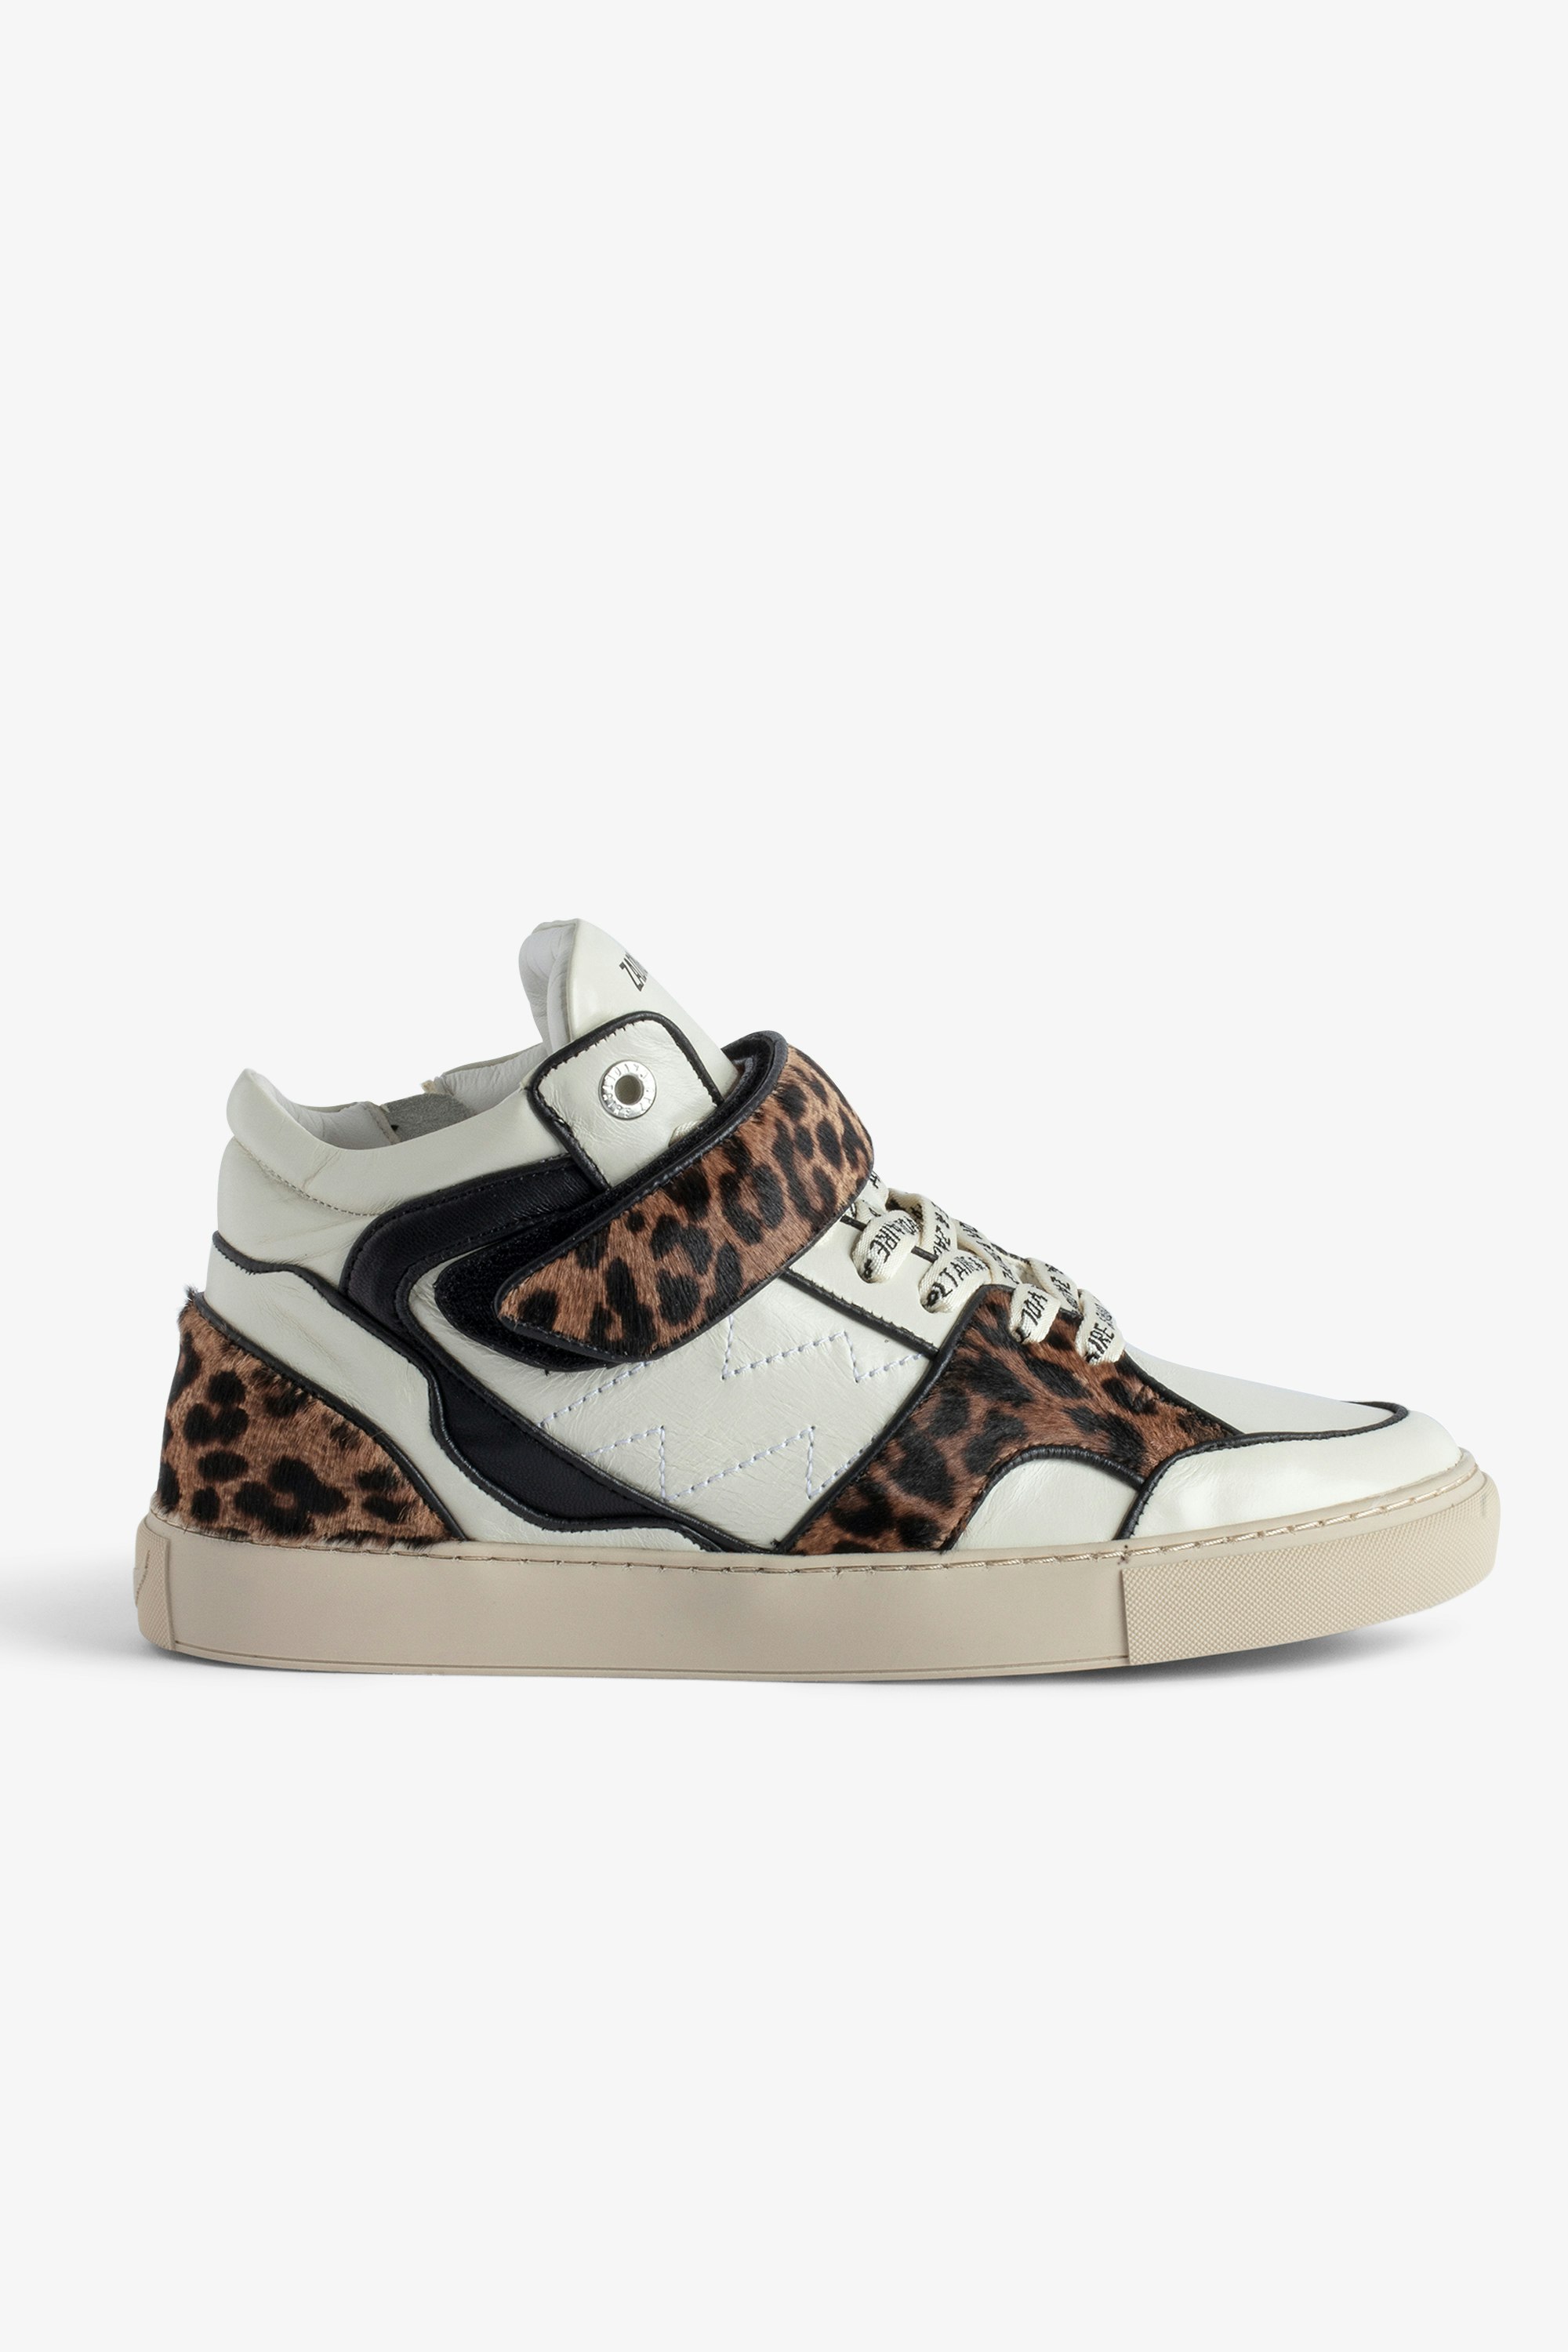 ZV1747 Mid Flash trainers Women’s leopard-effect brown leather mid-top trainers with contrasting panels and Velcro fastening.